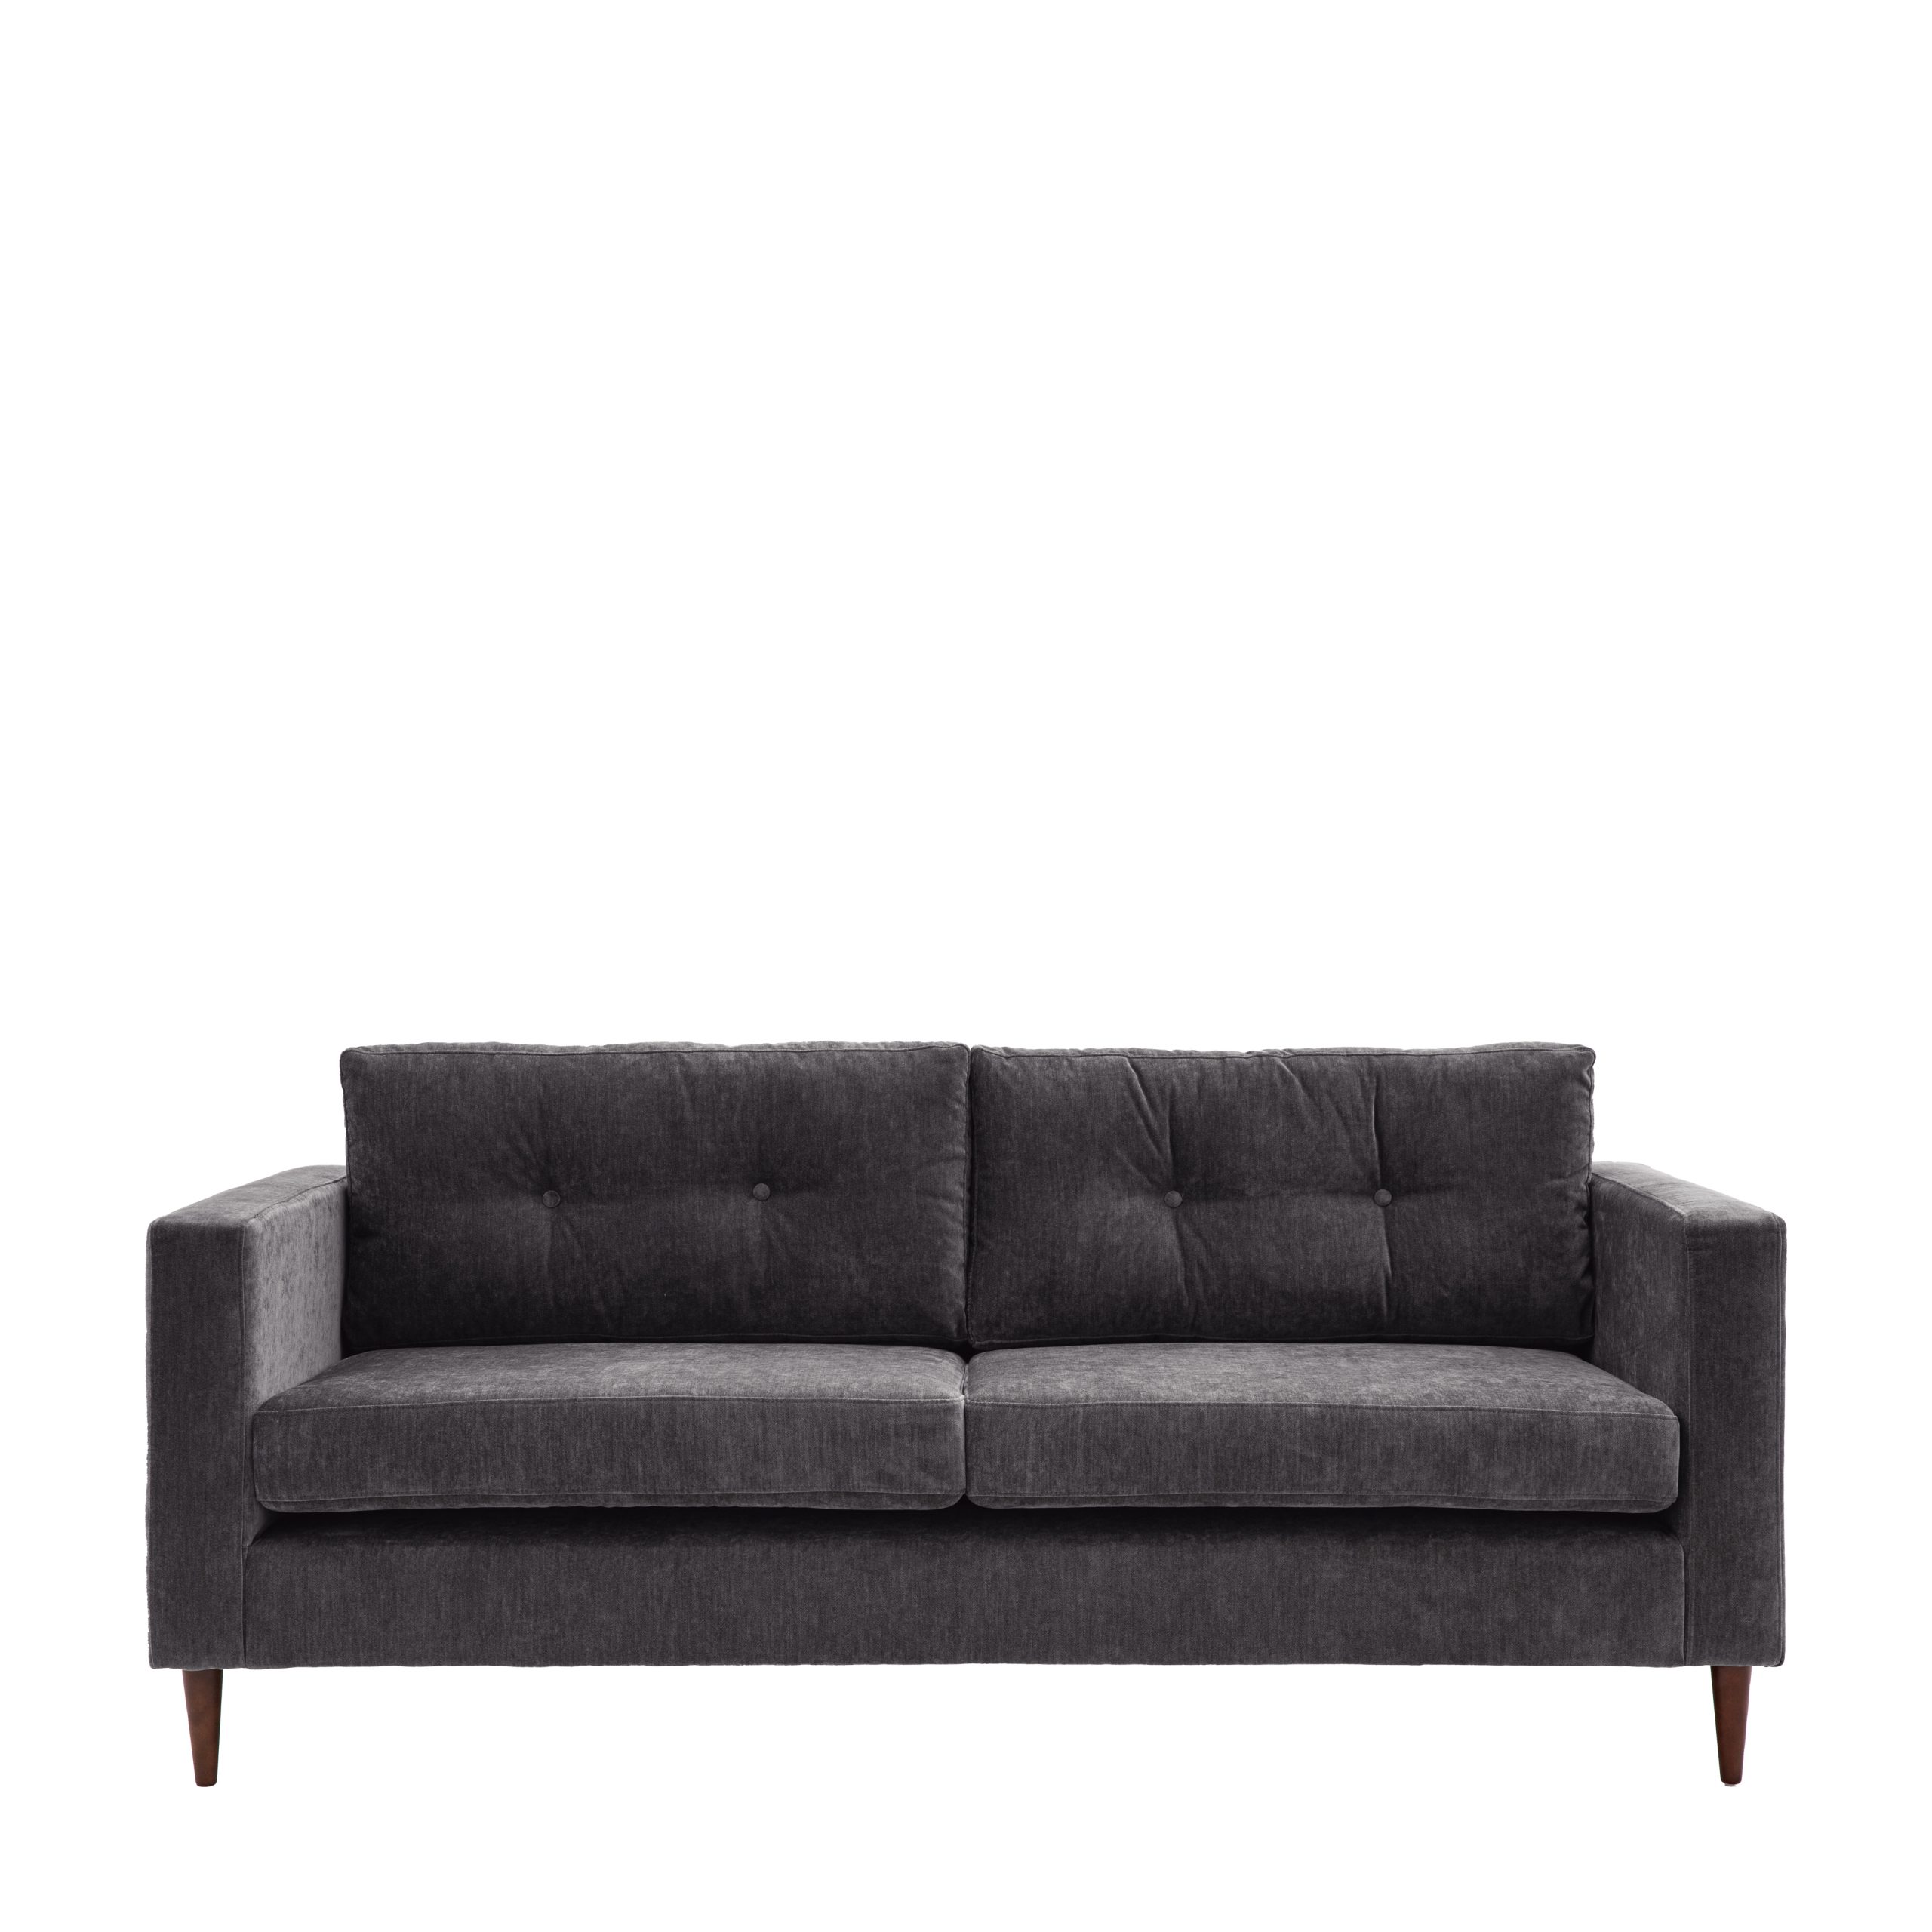 Gallery Direct Whitwell Sofa 3 Seater Charcoal